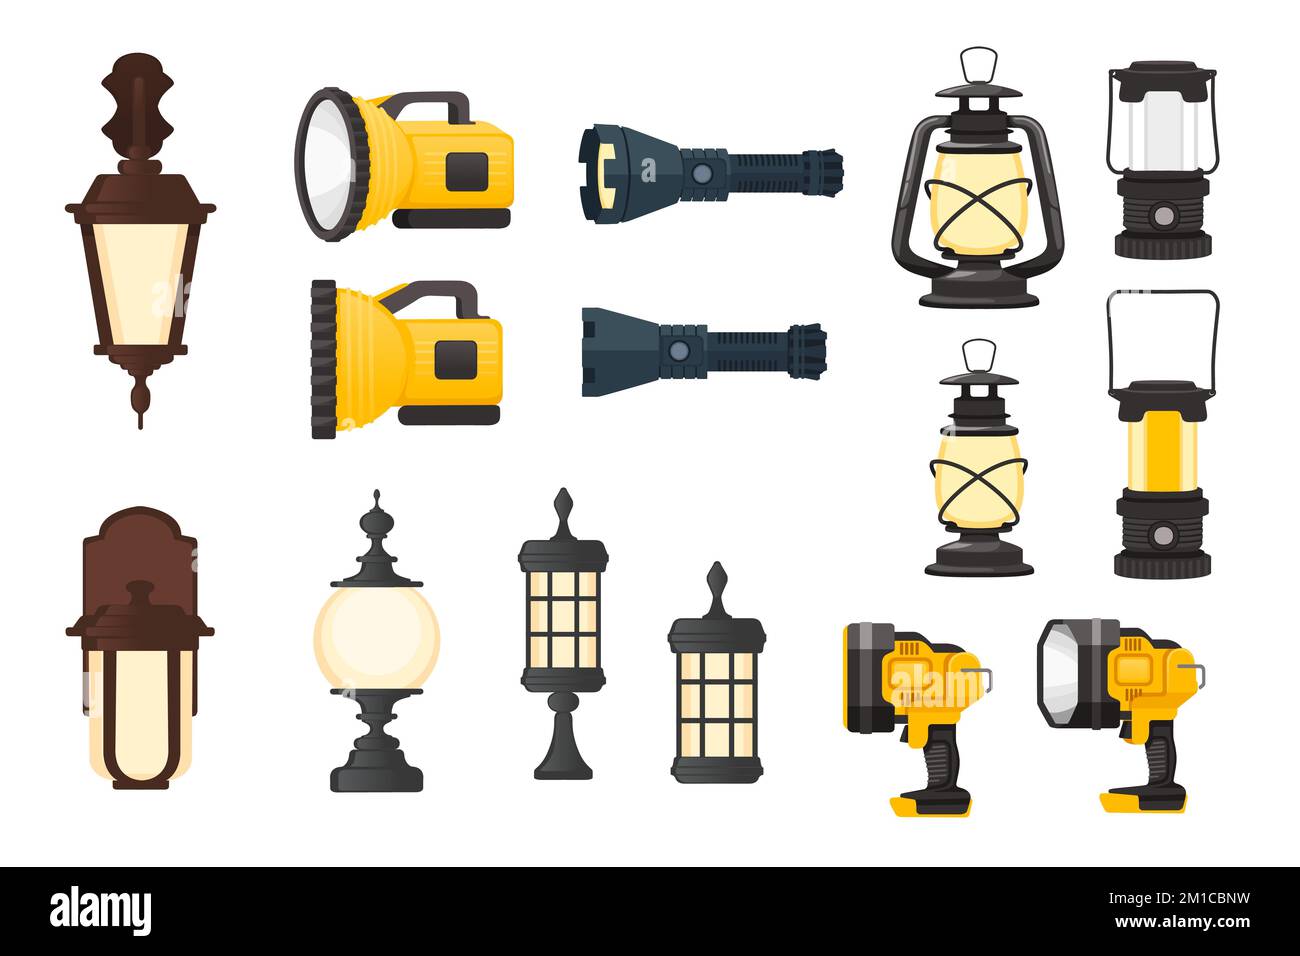 Set of modern flashlight and retro style street lamps vector illustration isolated on white background Stock Vector